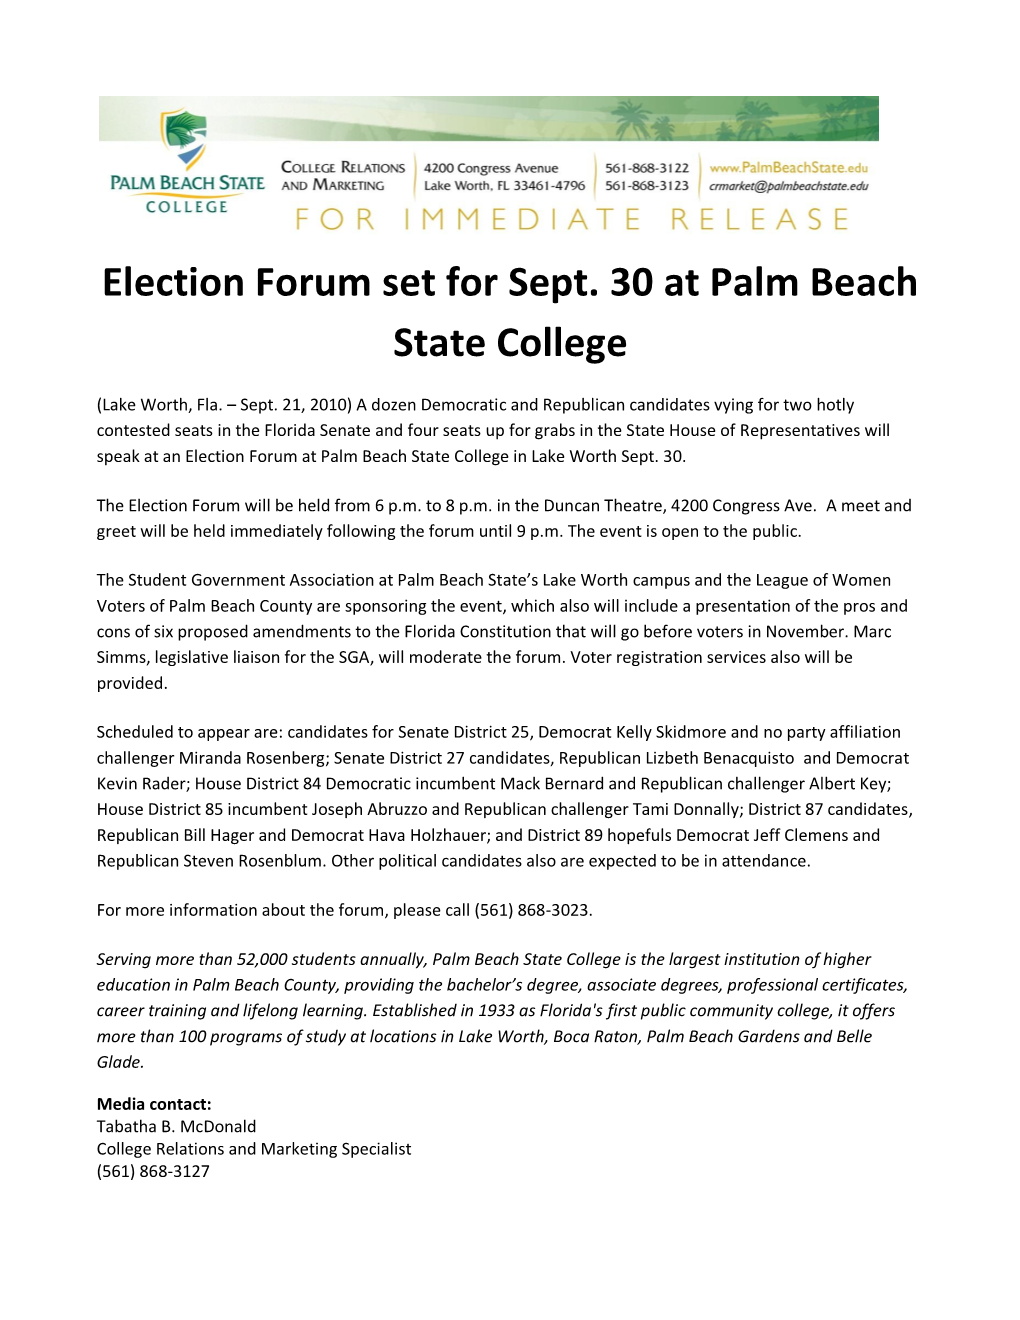 Election Forum Set for Sept. 30 at Palm Beach State College